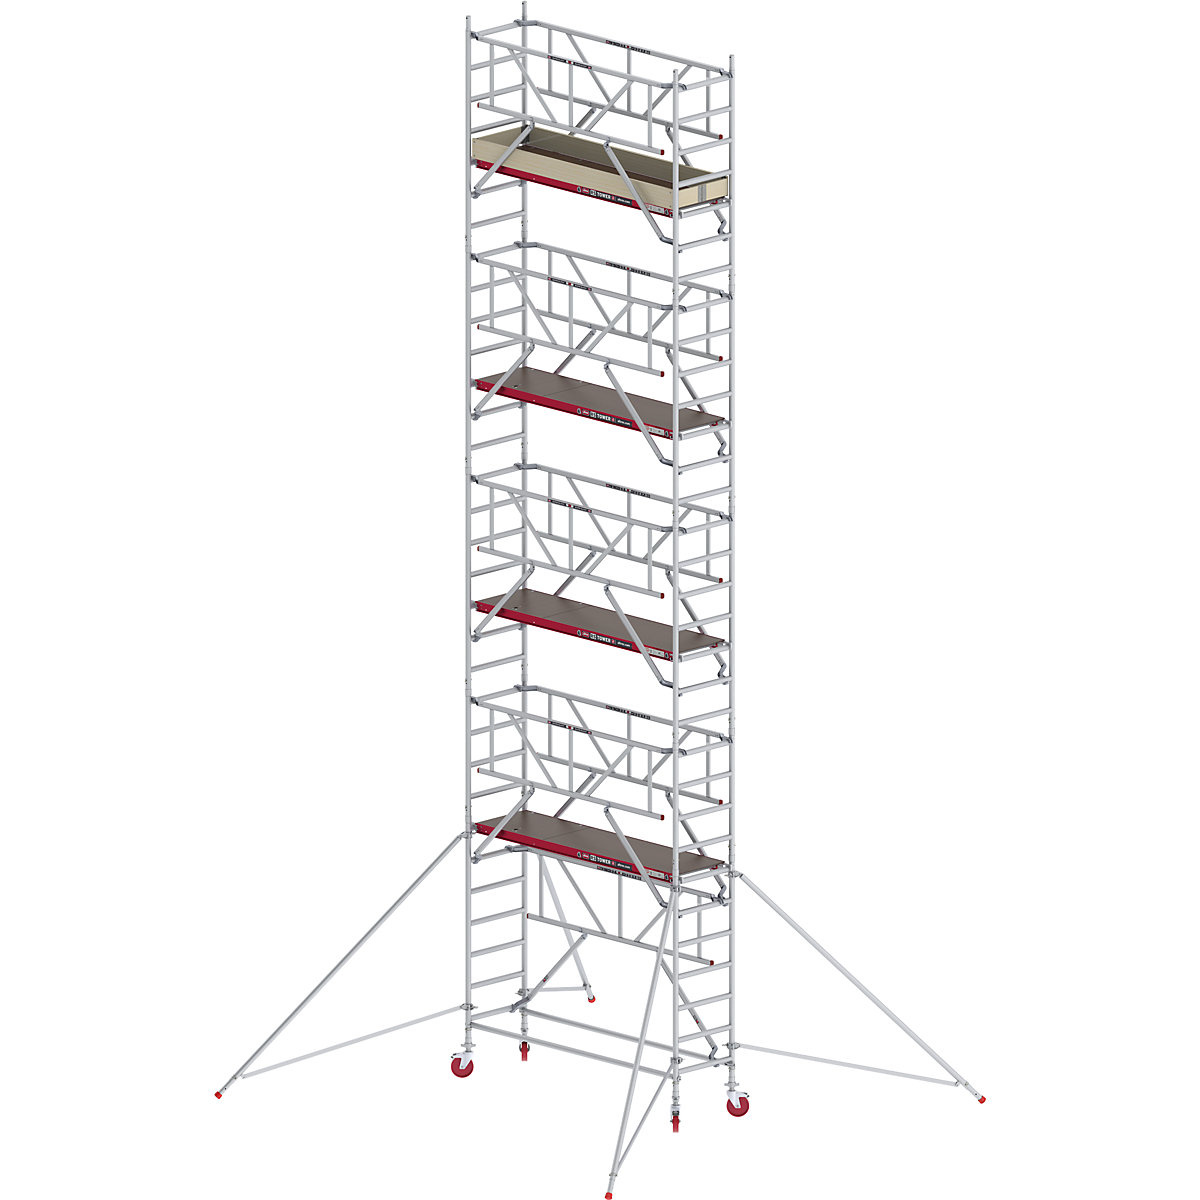 RS TOWER 41 slim mobile access tower with Safe-Quick® – Altrex, wooden platform, length 1.85 m, working height 10.20 m-1